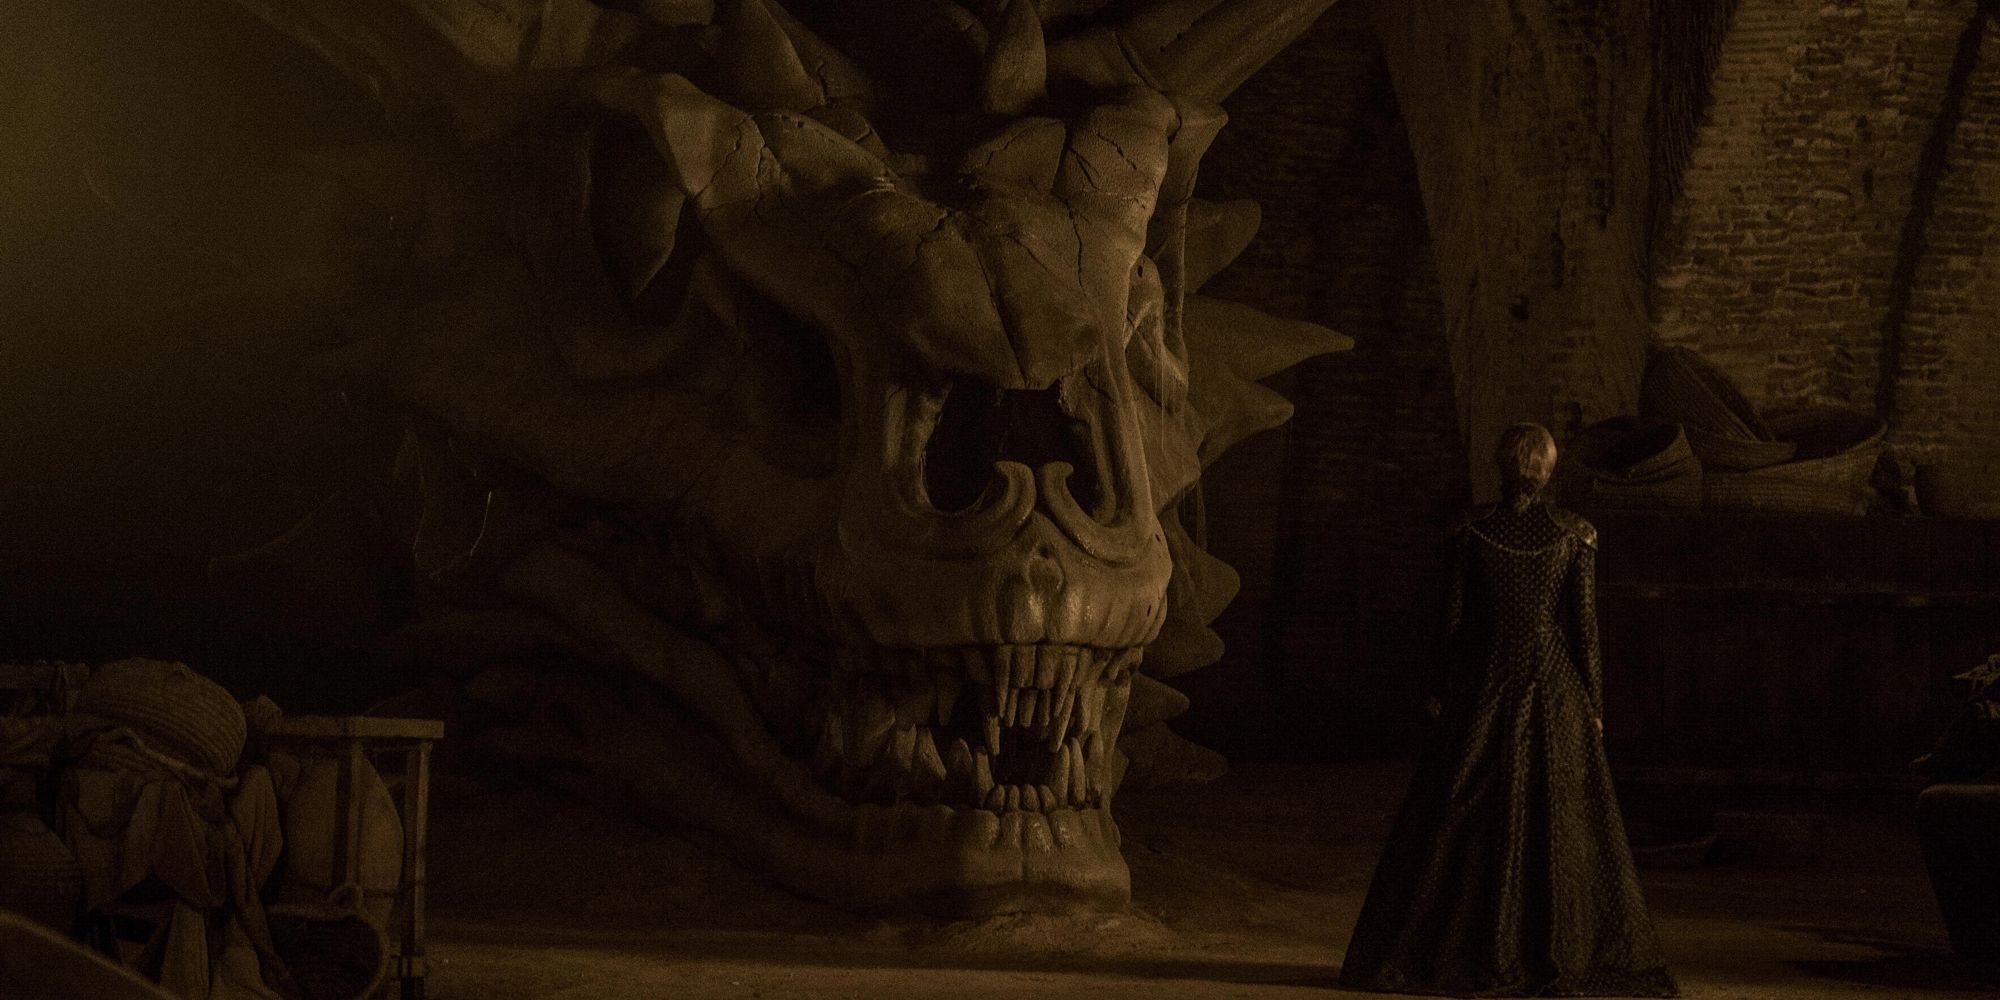 Cersei looking at the skull of Balerion the Dread in 'Game of Thrones'